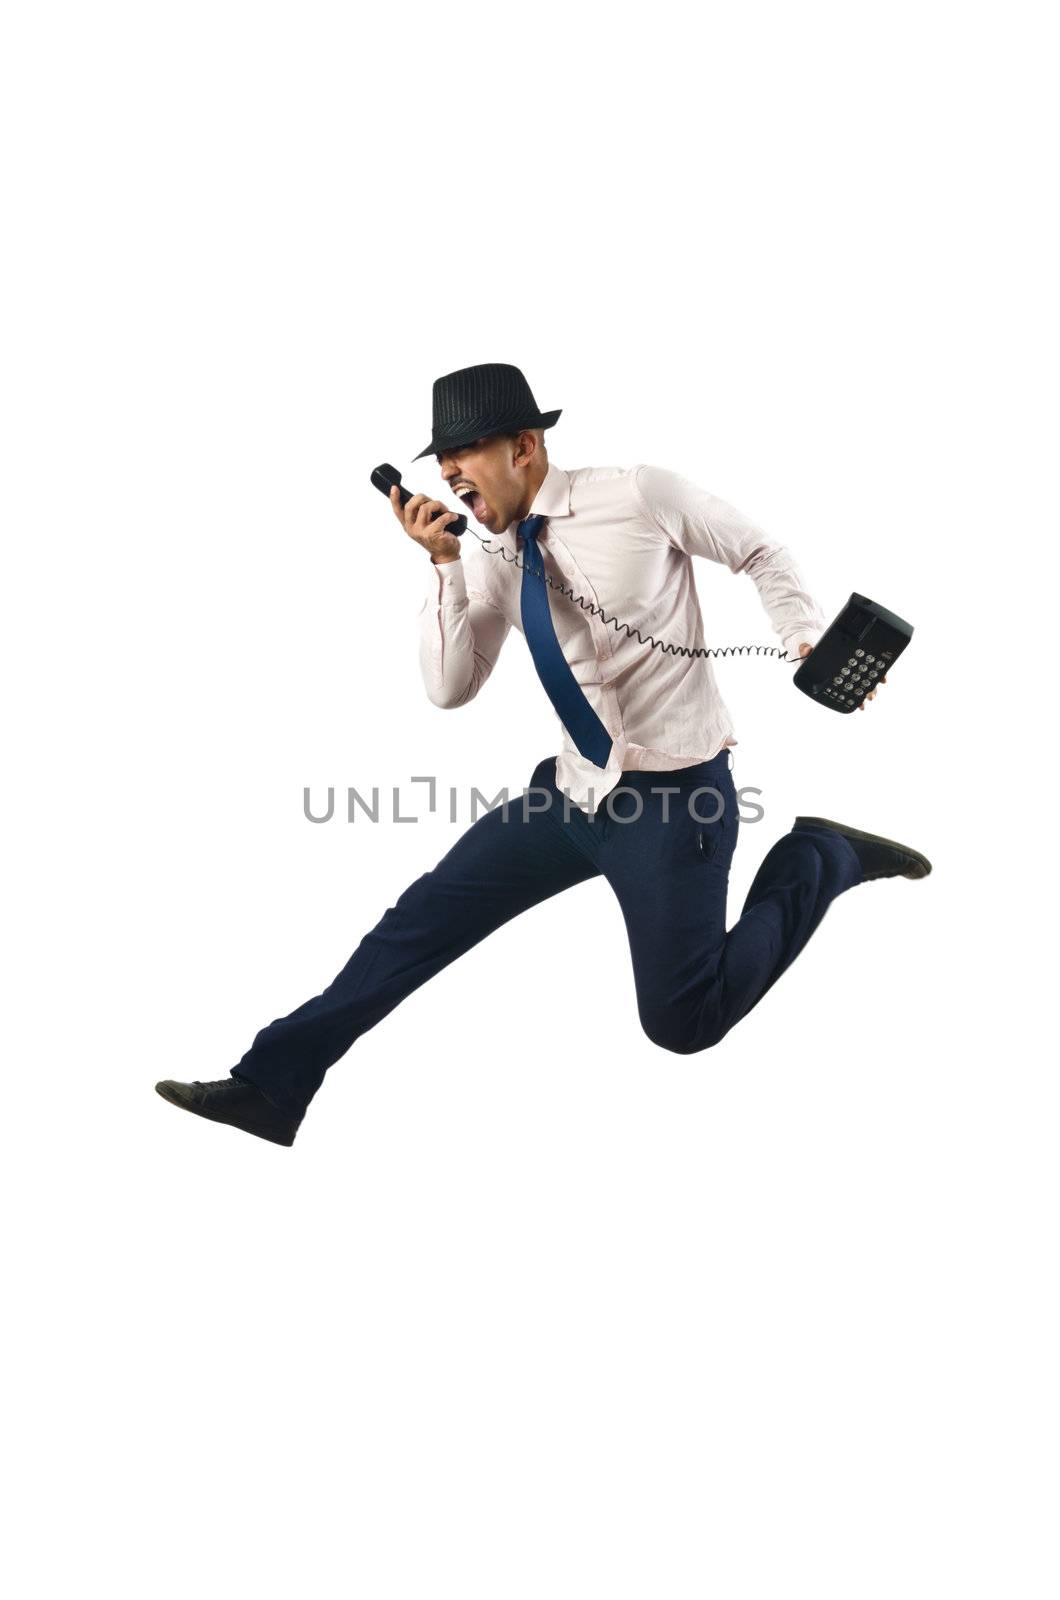 Jumping businessman in business concept on white by Elnur